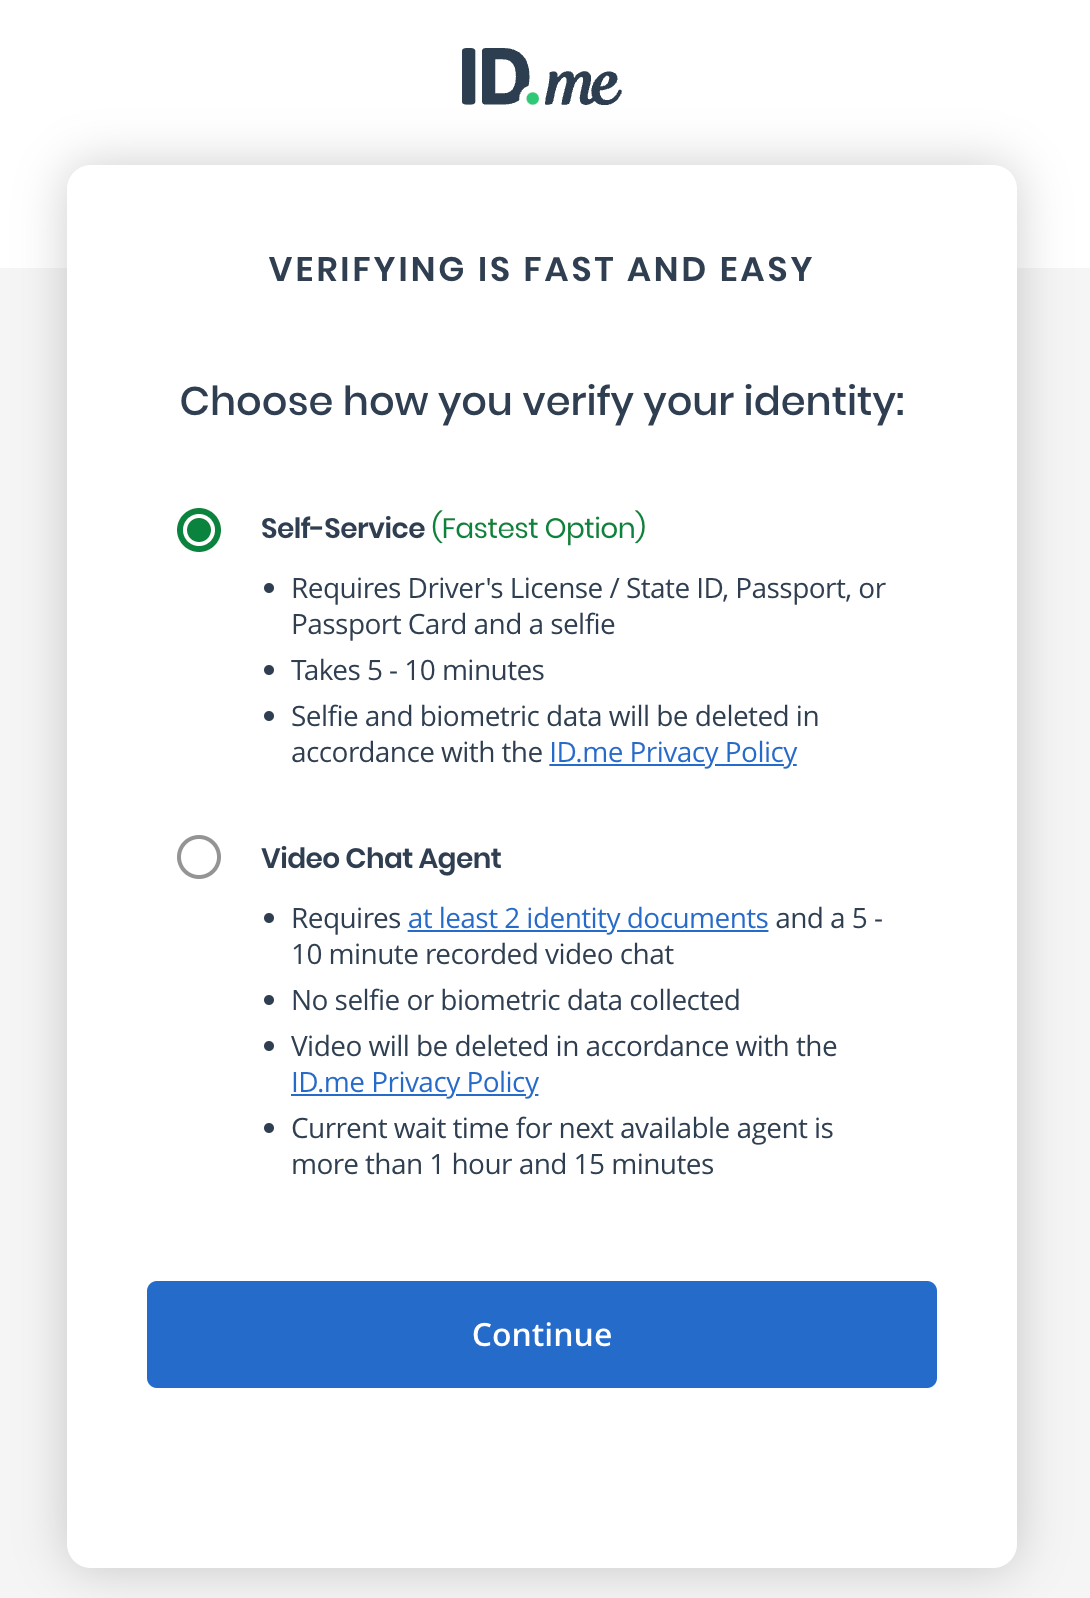 Choose how you verify your identity.png